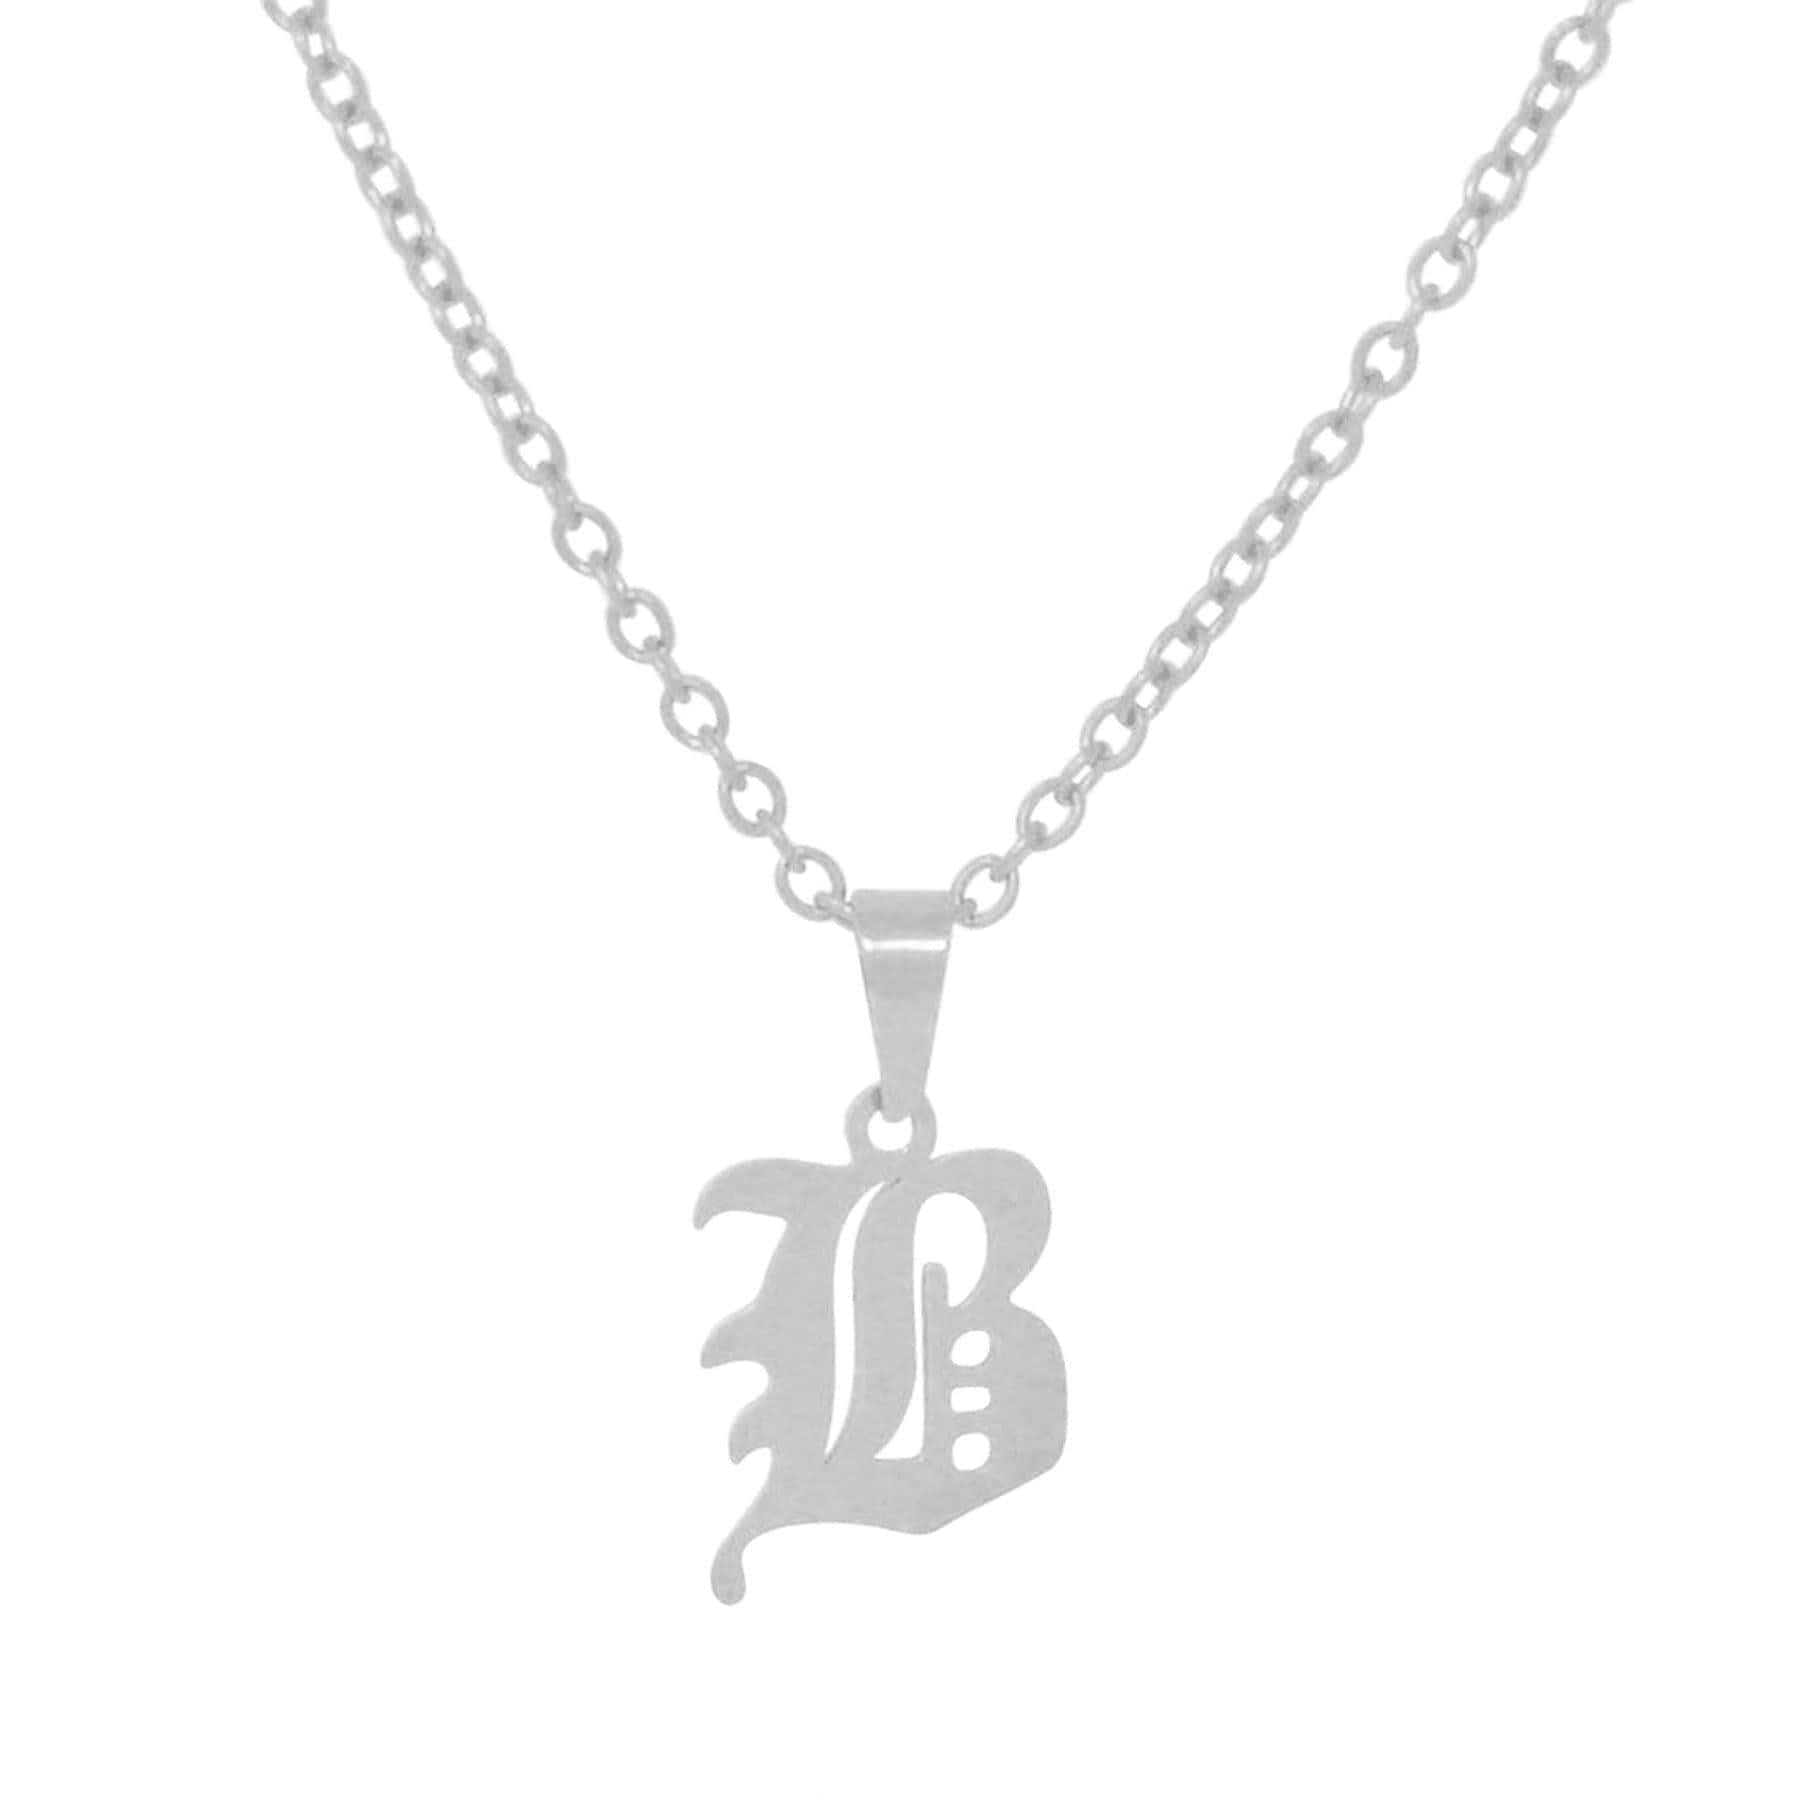 BohoMoon Stainless Steel Gothic Initial Choker / Necklace Silver / A / Choker